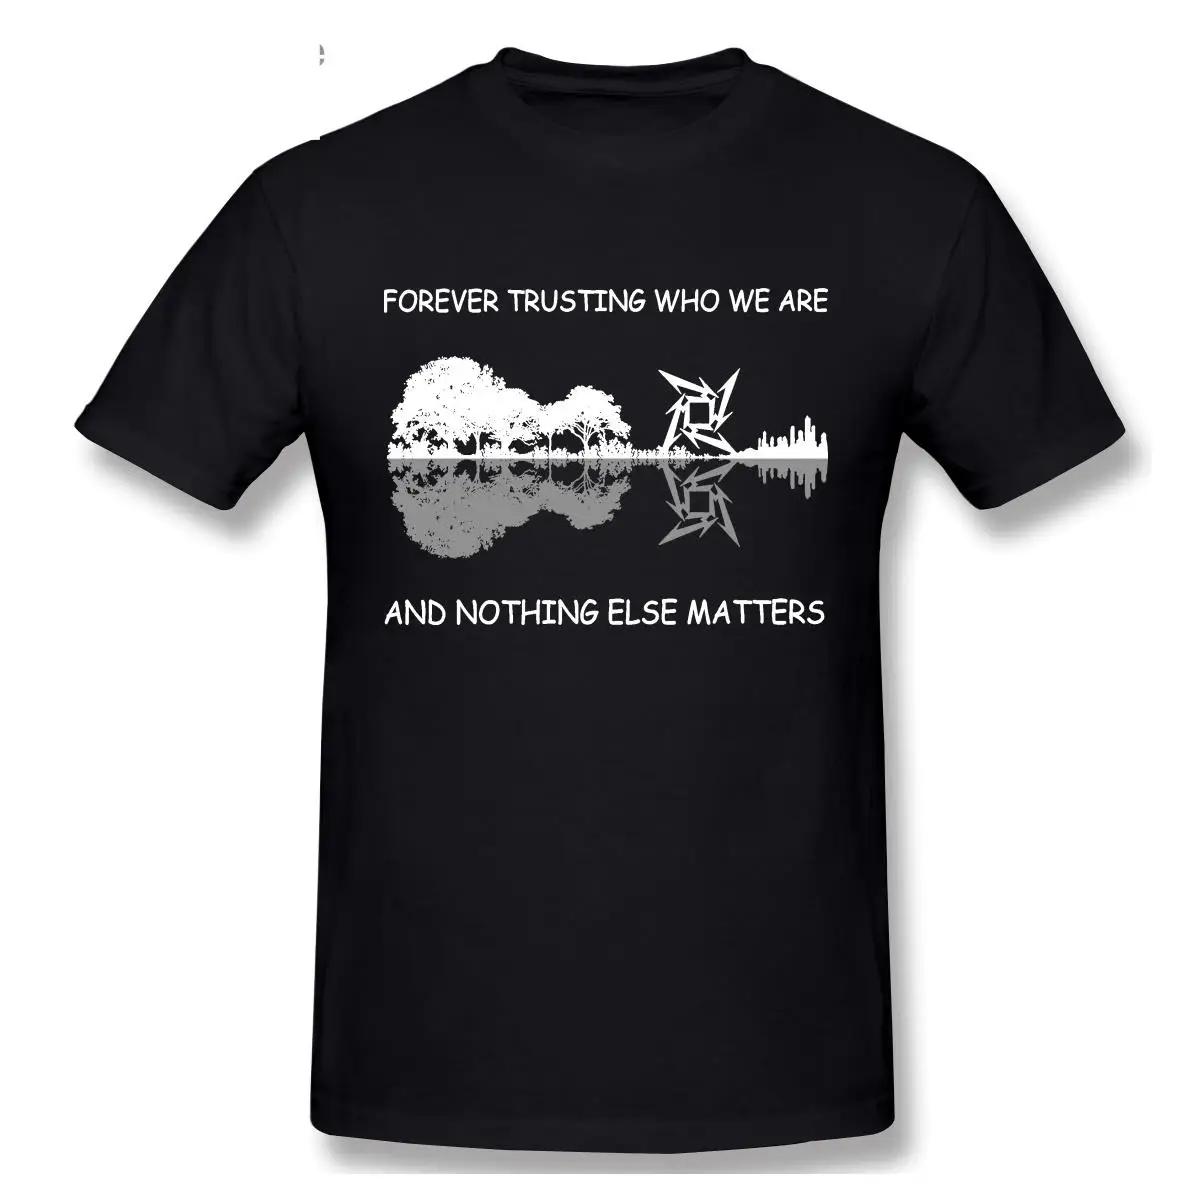 LIDUS Forever Trusting We Are And Nothing other Matters Funny T Shirt Ÿ ũ  Ʈ  м ư Ƽ